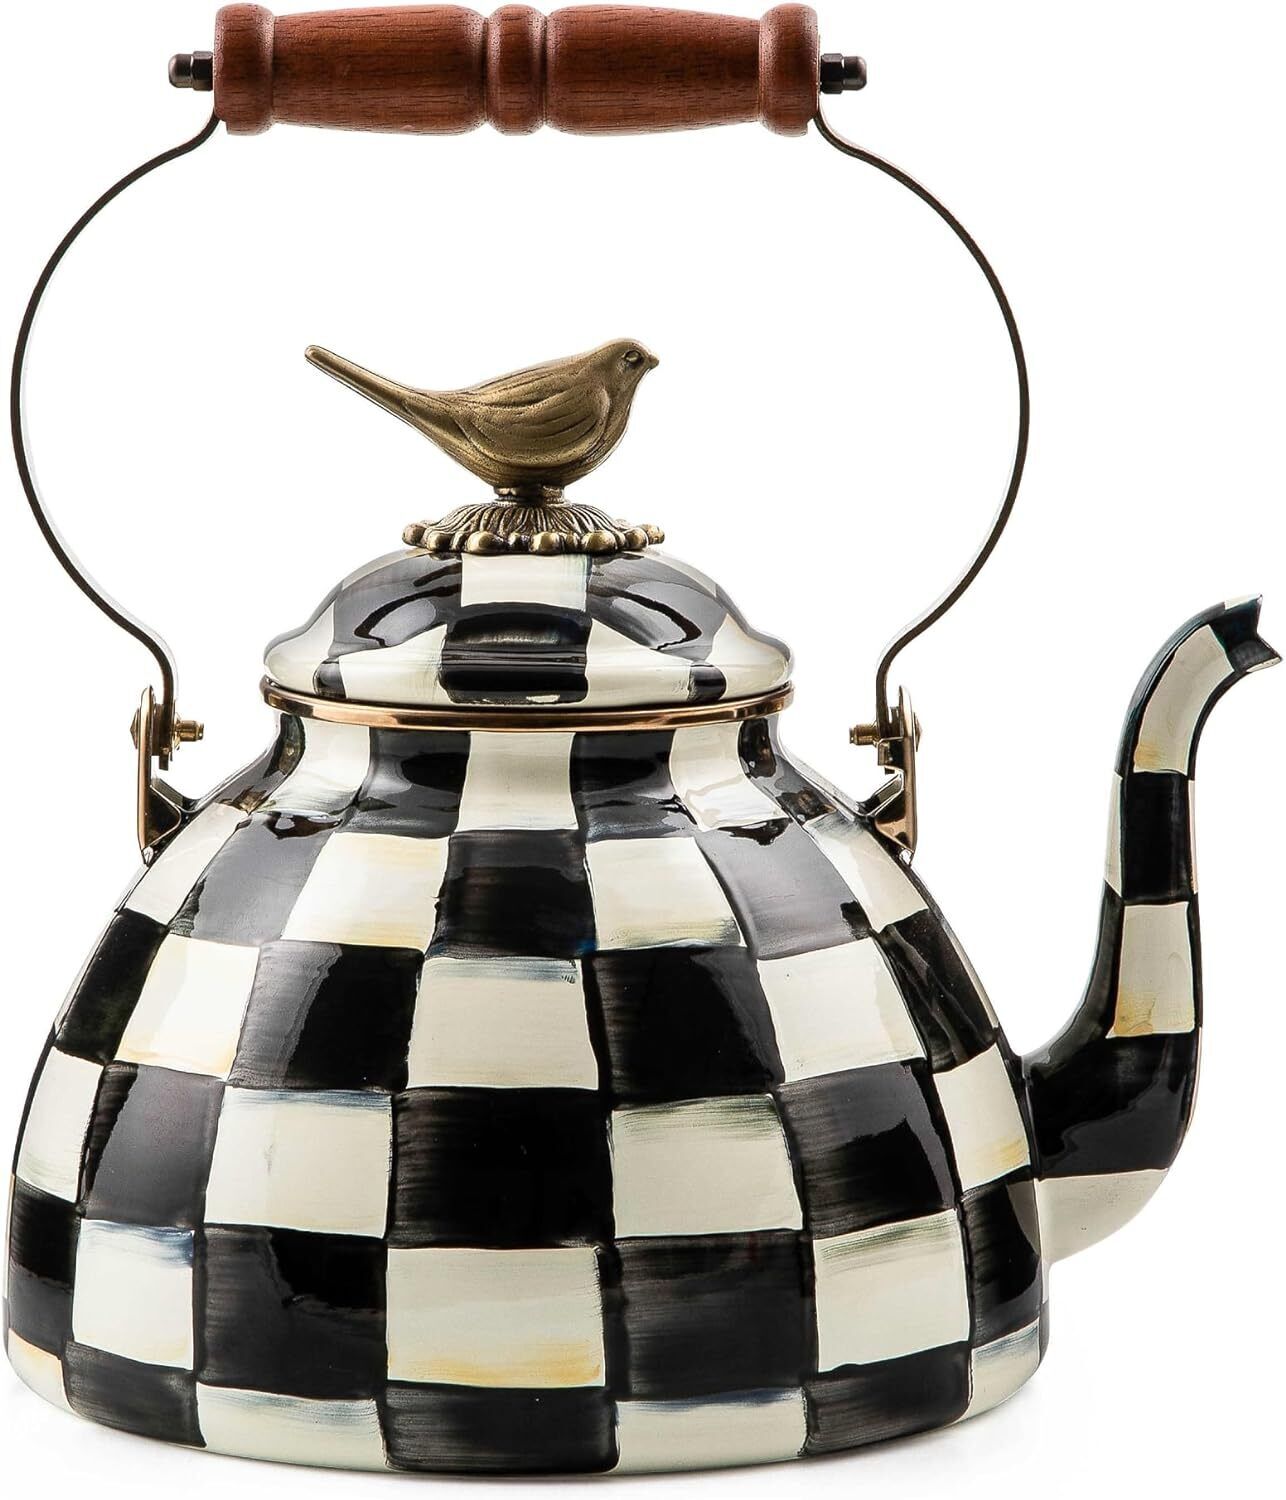 MacKenzie-Childs Courtly Check Enamel Tea Kettle with Bird Topper, Stovetop...